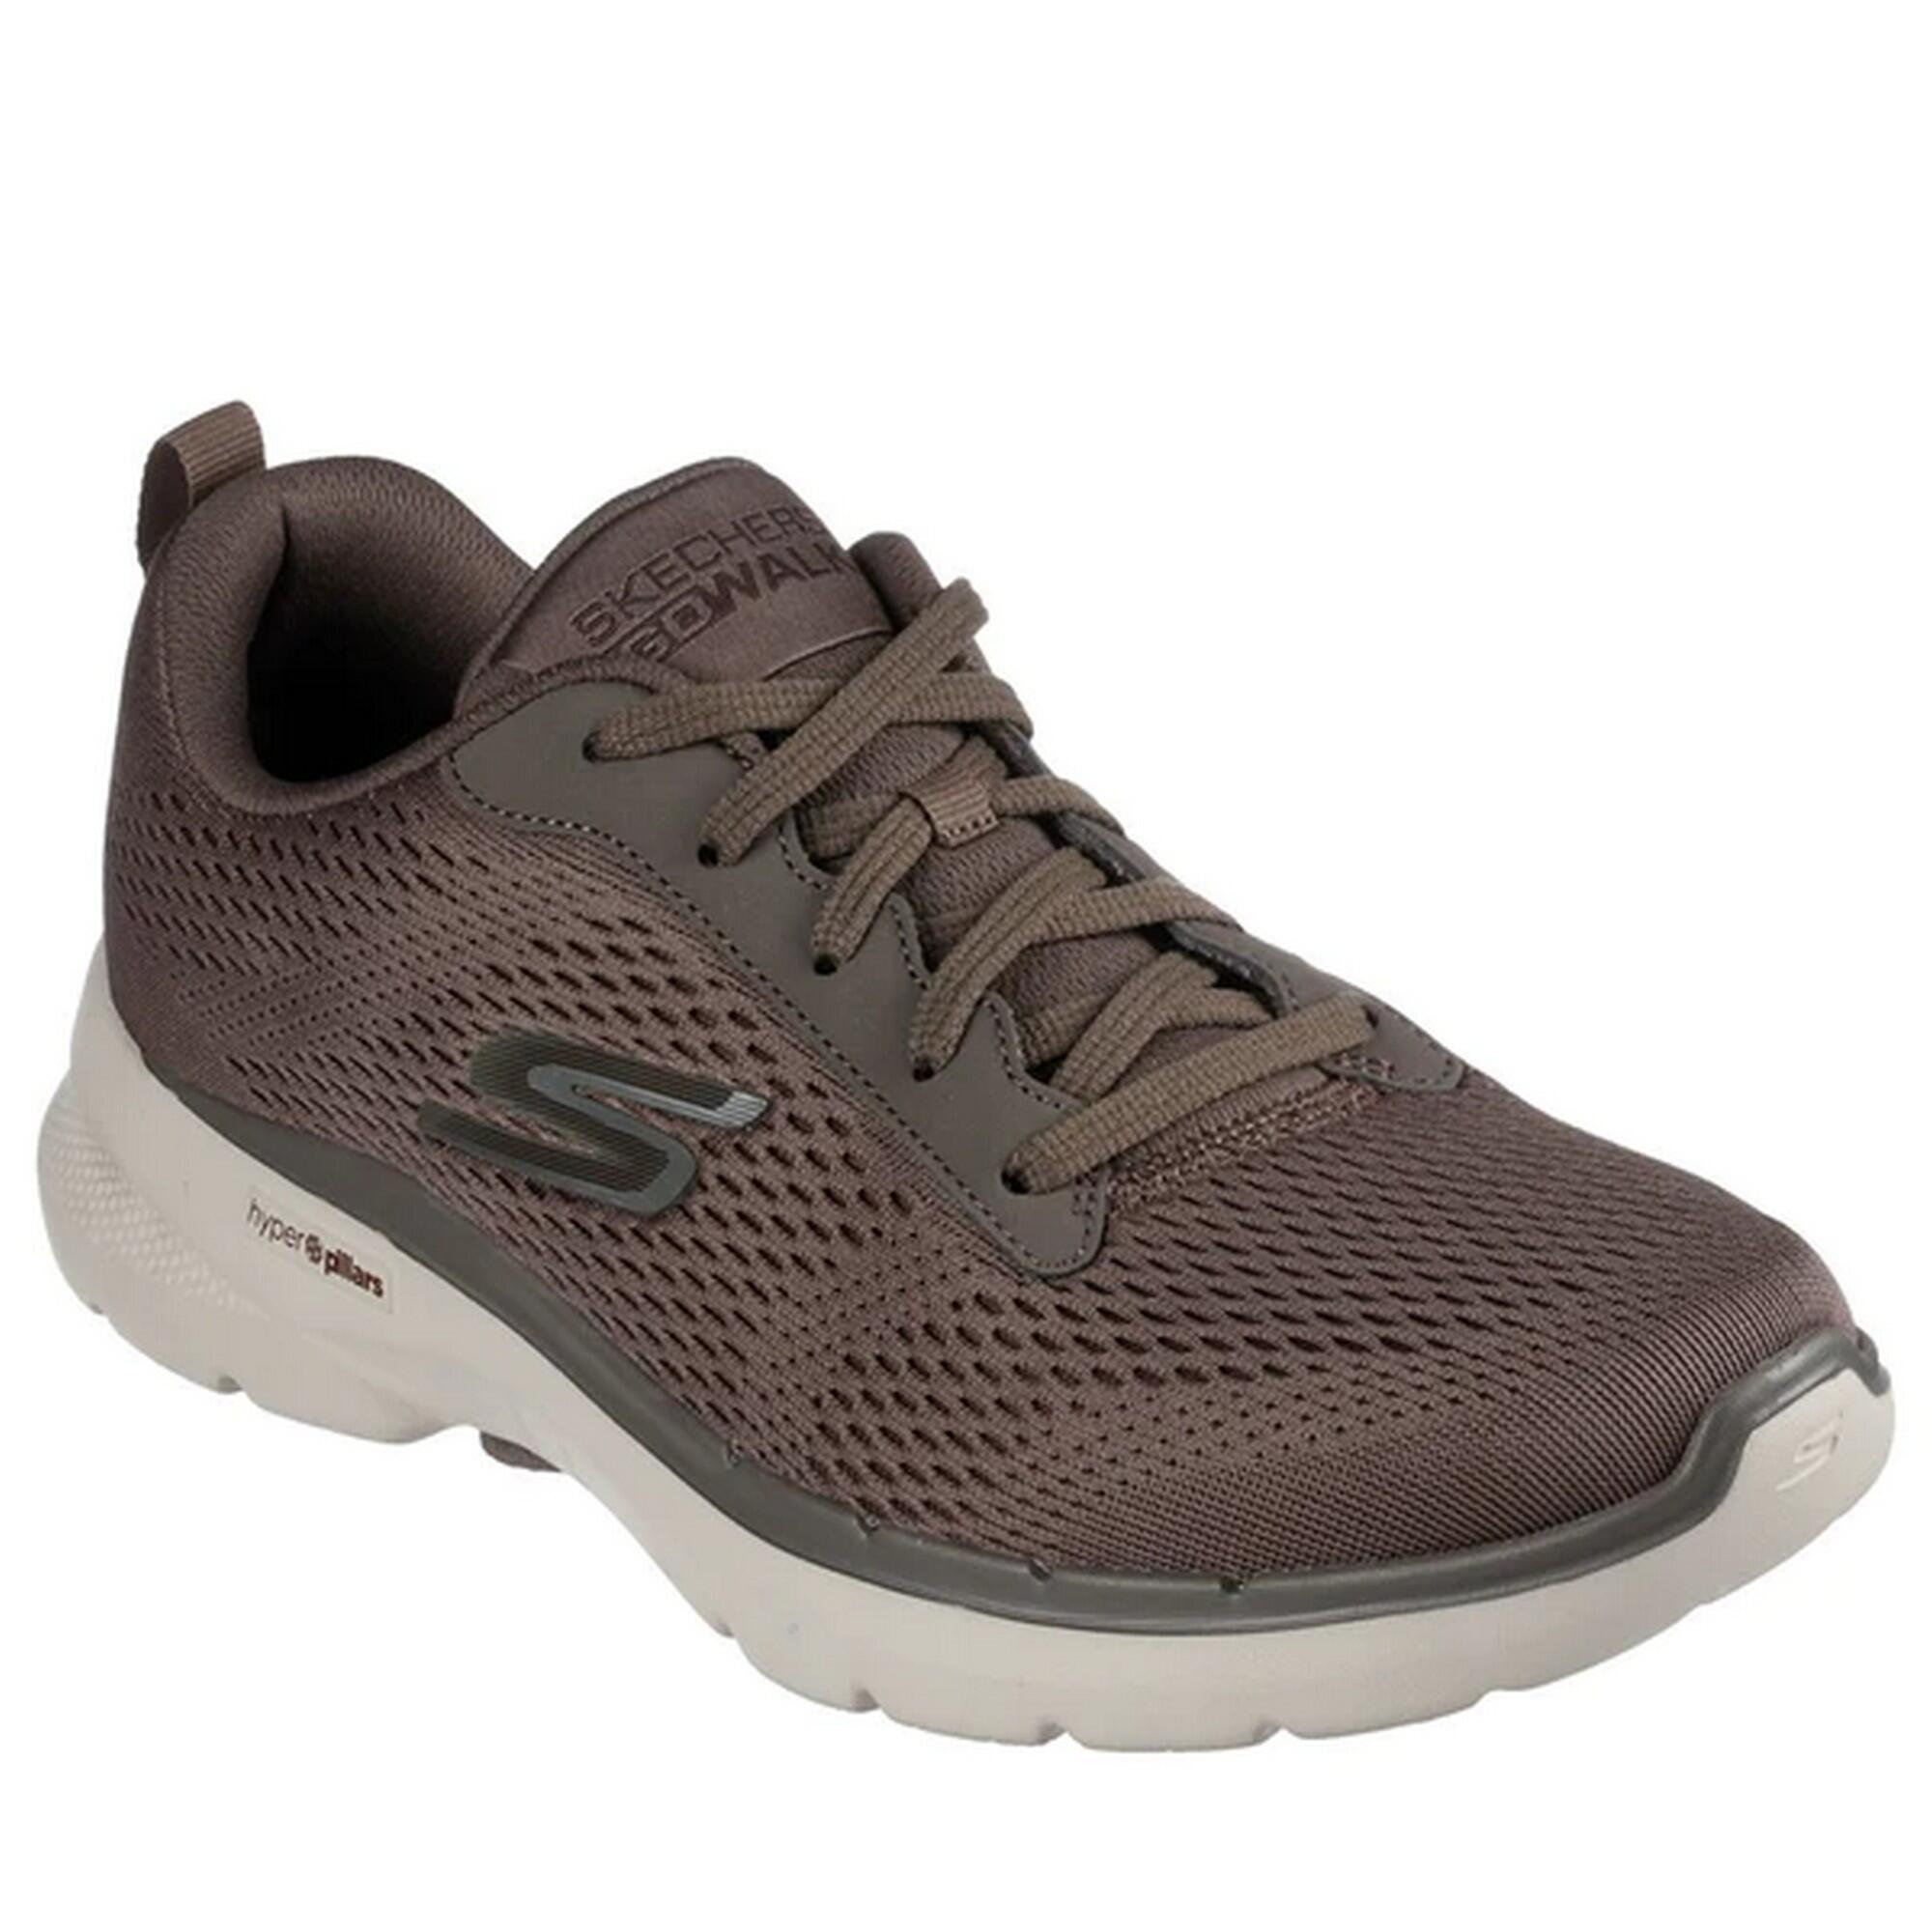 SKECHERS Mens Go Walk 6 Avalo Trainers (Taupe)